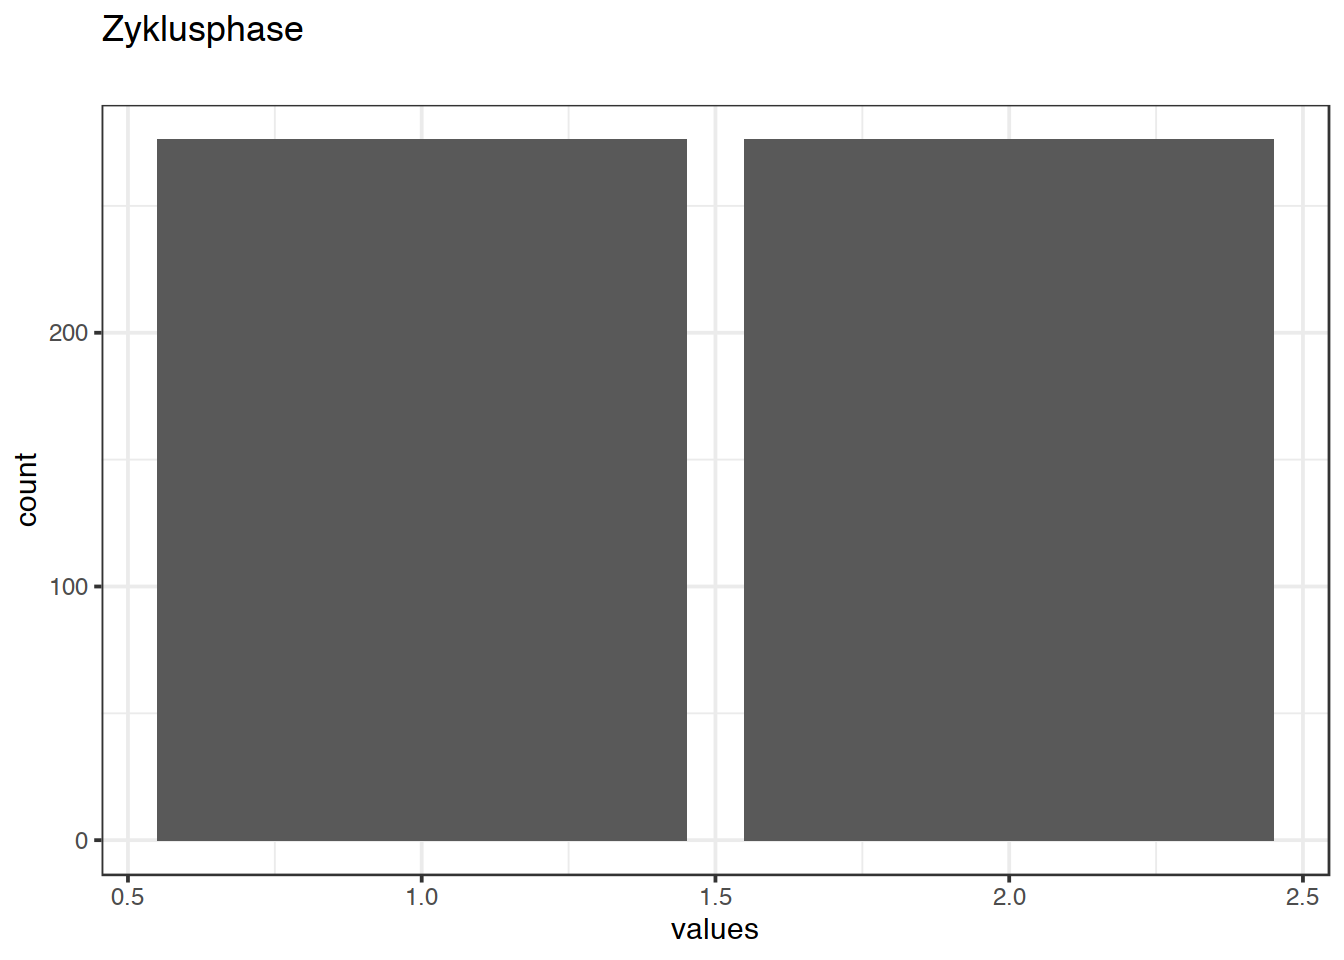 Distribution of values for Zyklusphase